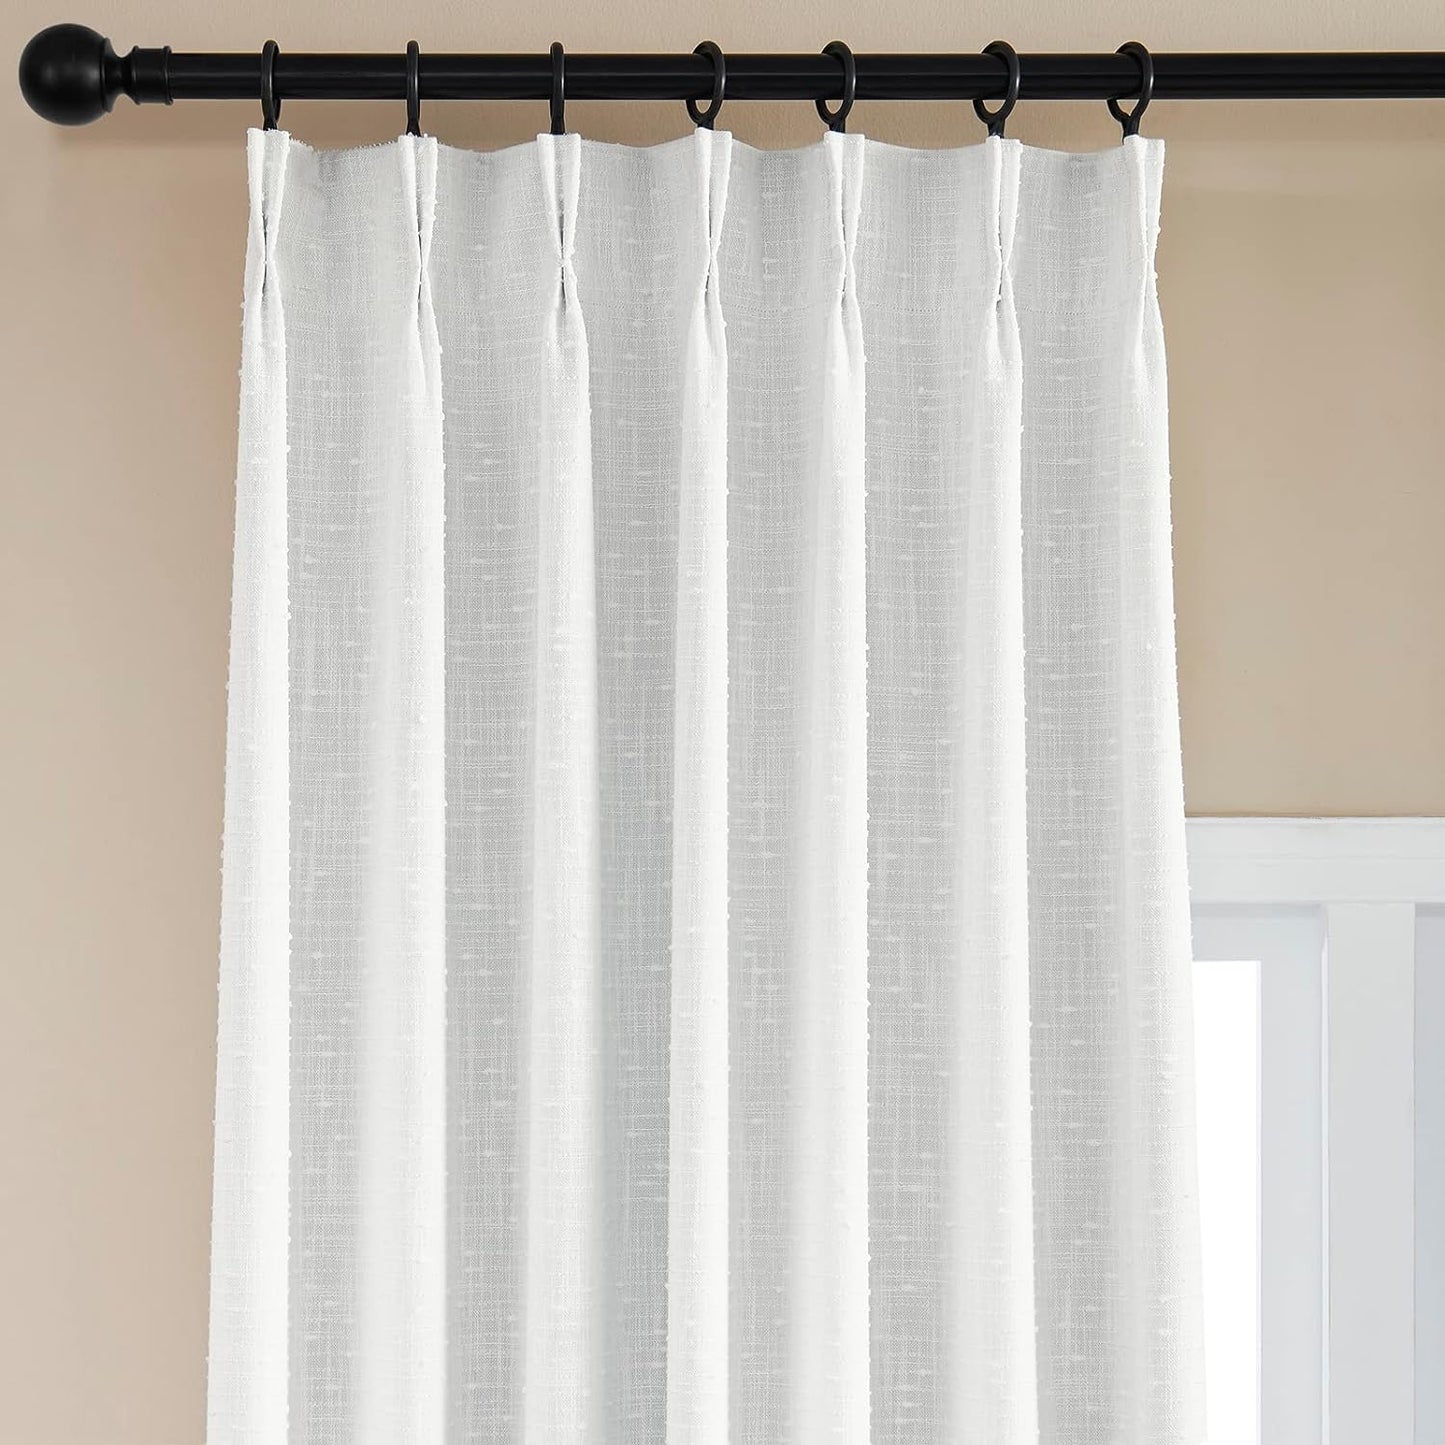 Maison Colette Pinch Pleat White Natural Linen Curtain 84 Inches Length for Bedroom,Back Tab Semi Sheer Window Treatment Drapes for Living Room,2 Panels,40" Width  Maison Colette Home   